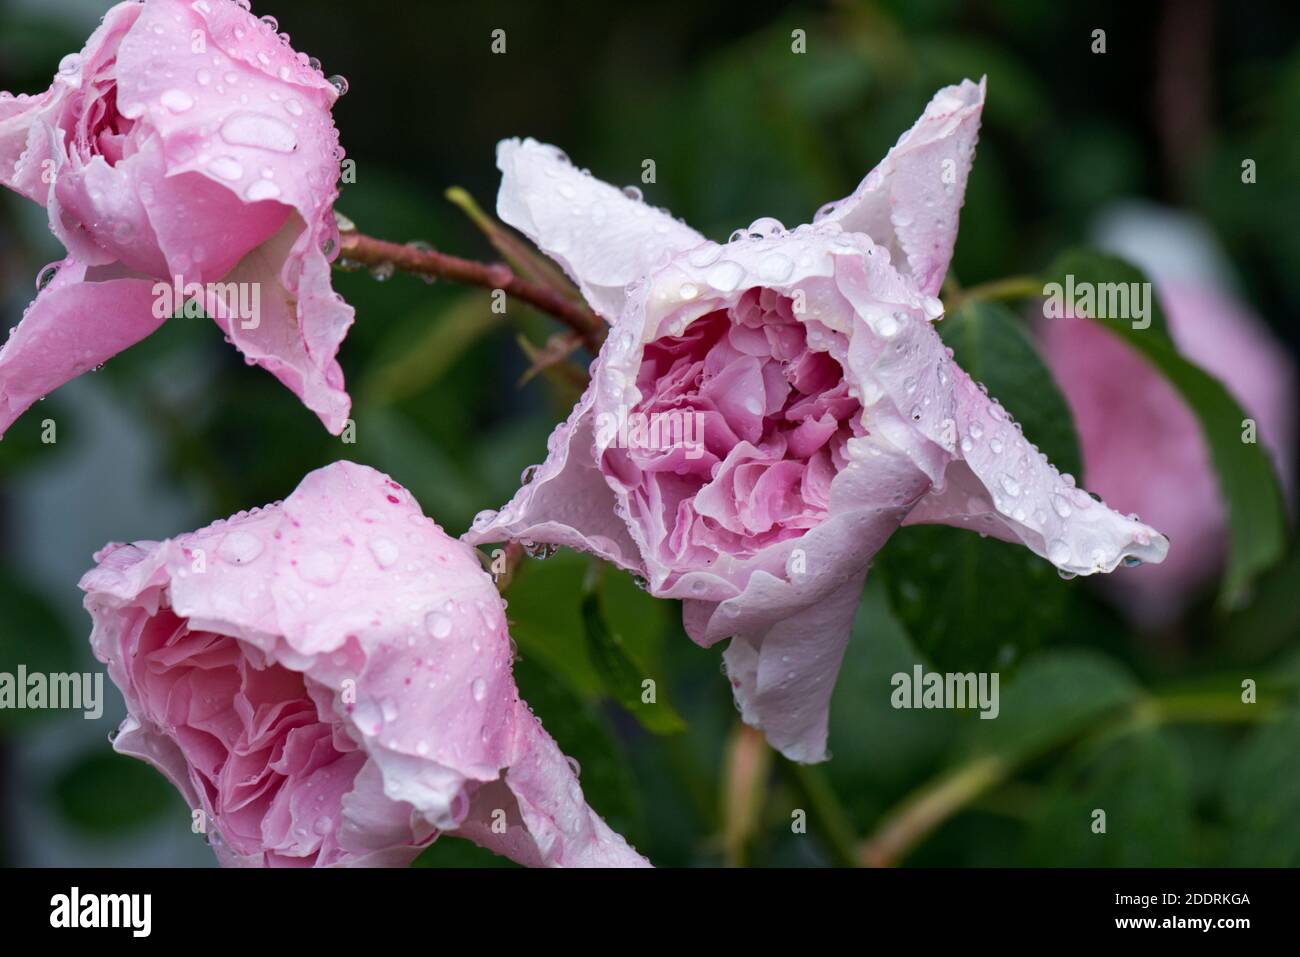 Pink rose (Rosa sp.) flowers covered with rain dropland showing early and advancing signs of grey mould (Botrytis cinerea) spotting, June Stock Photo